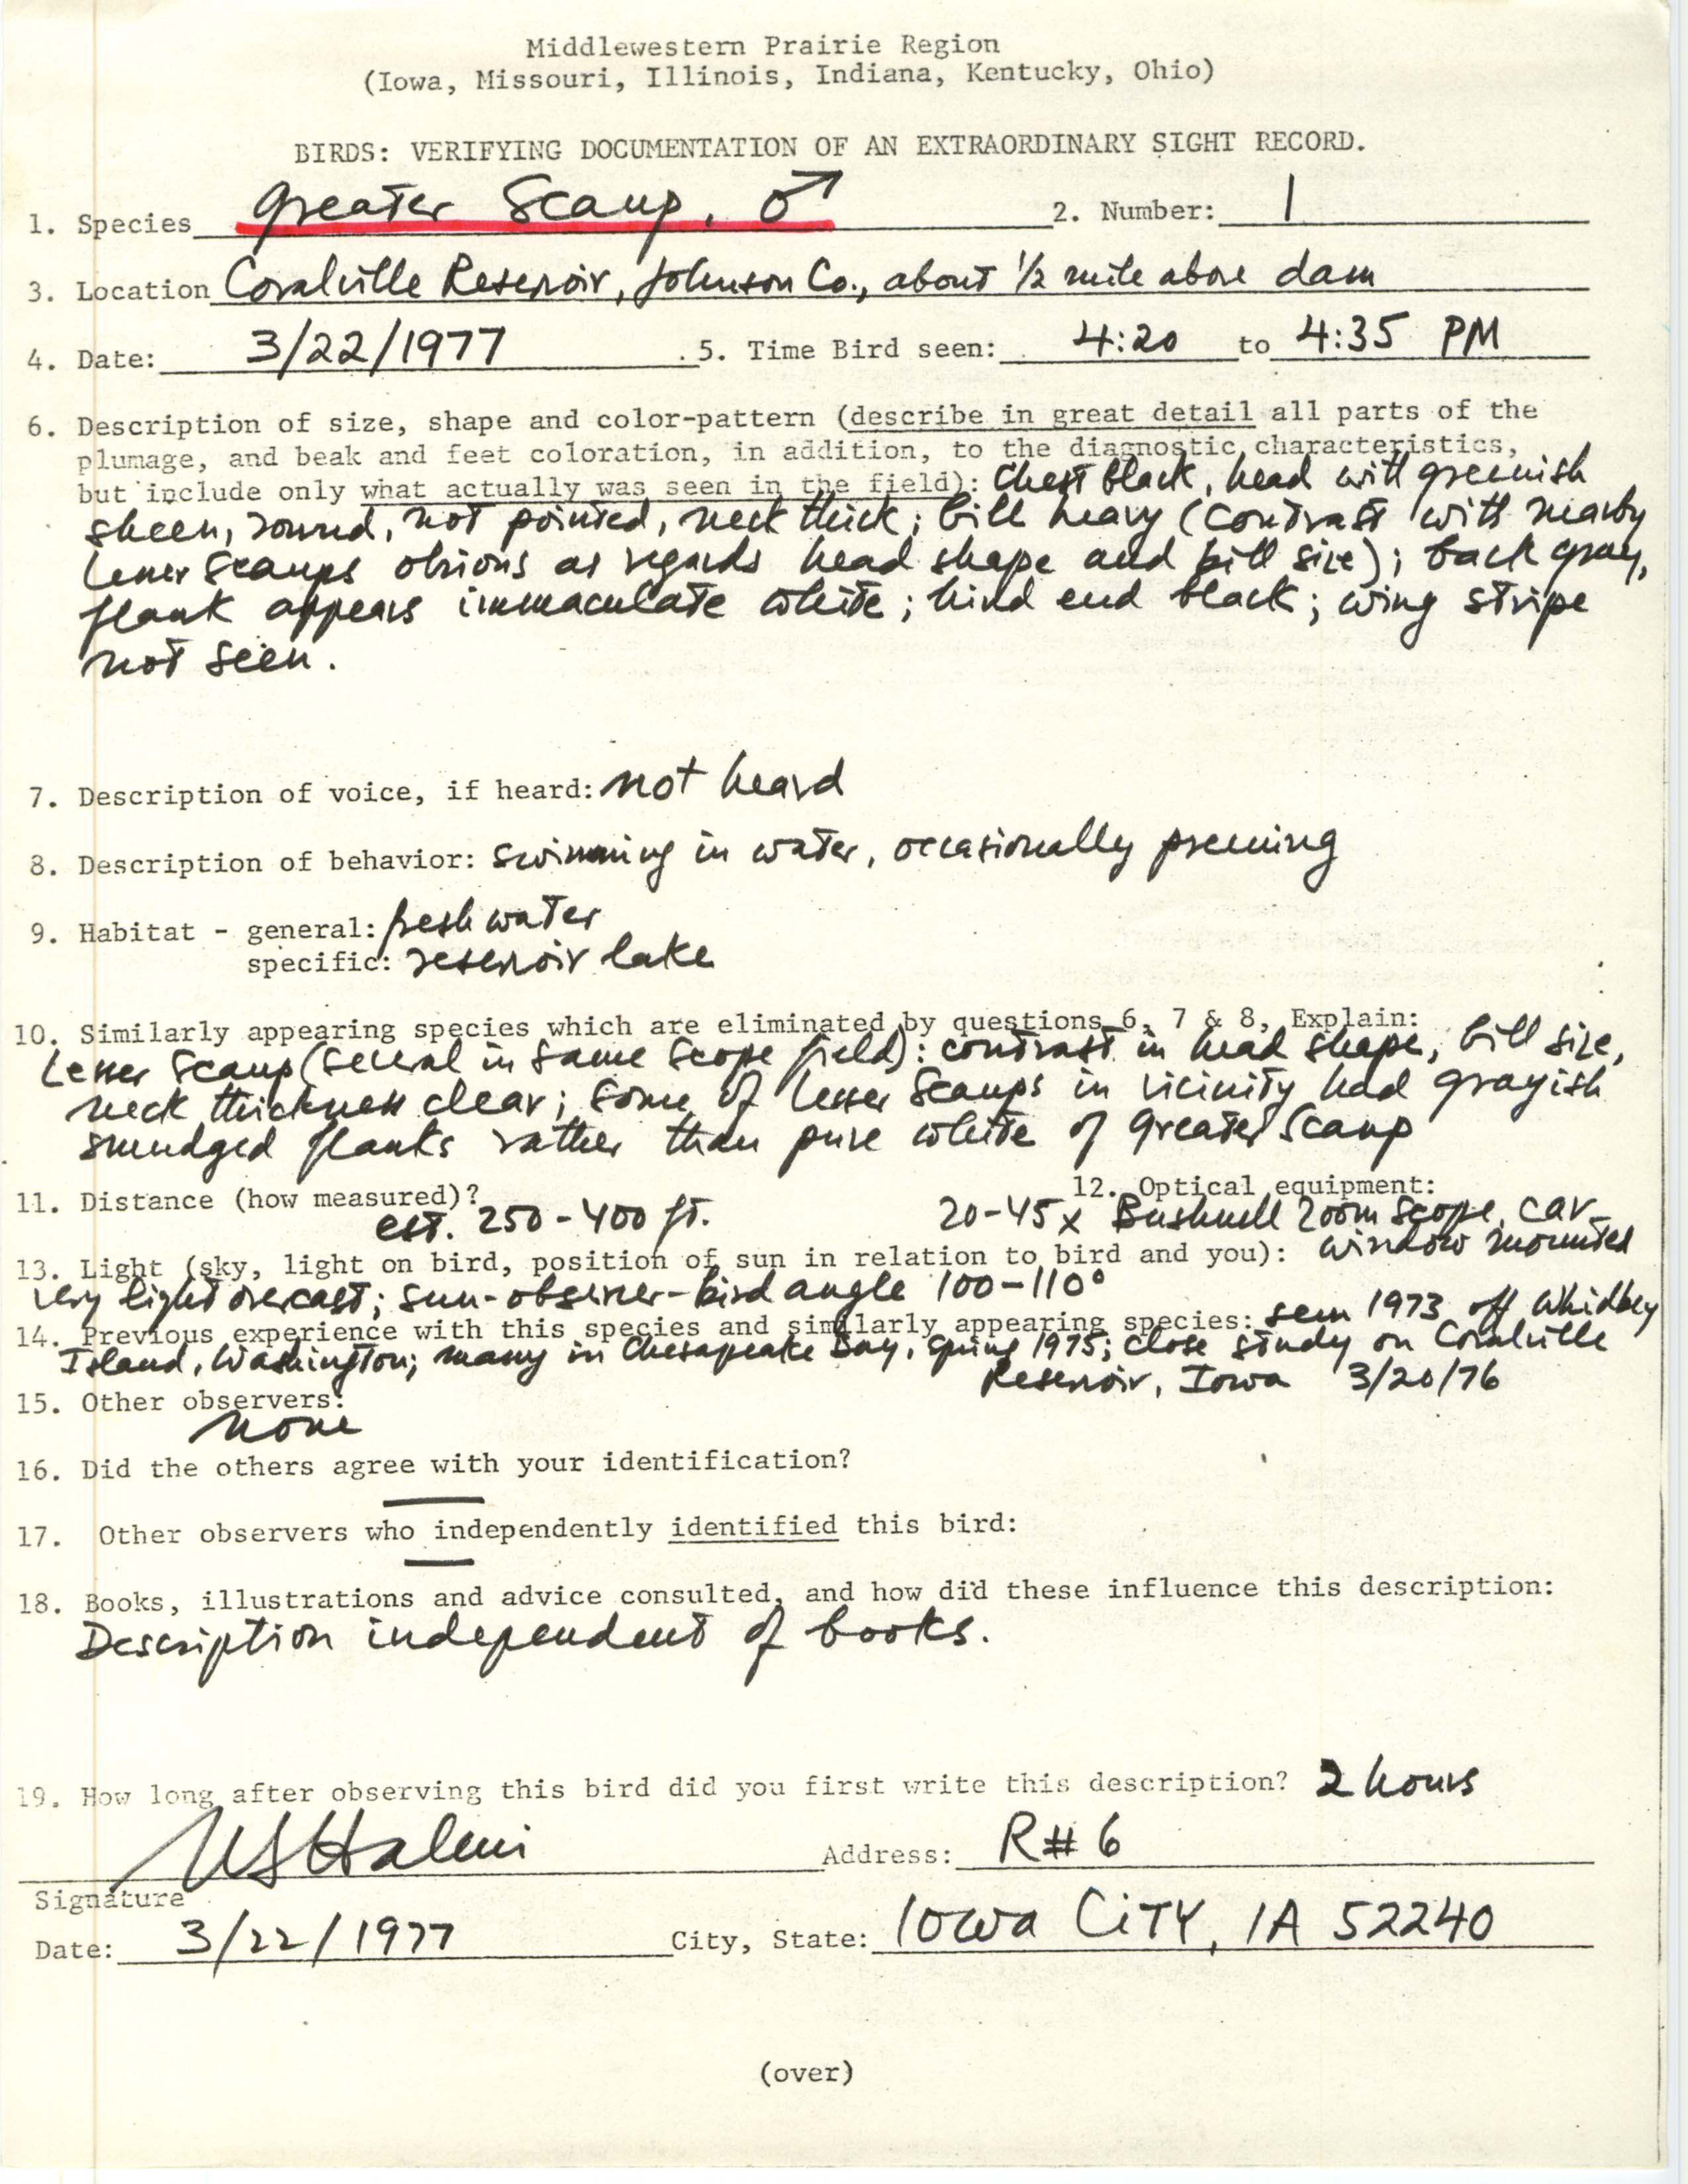 Rare bird documentation form for Greater Scaup at Coralville Reservoir, 1977